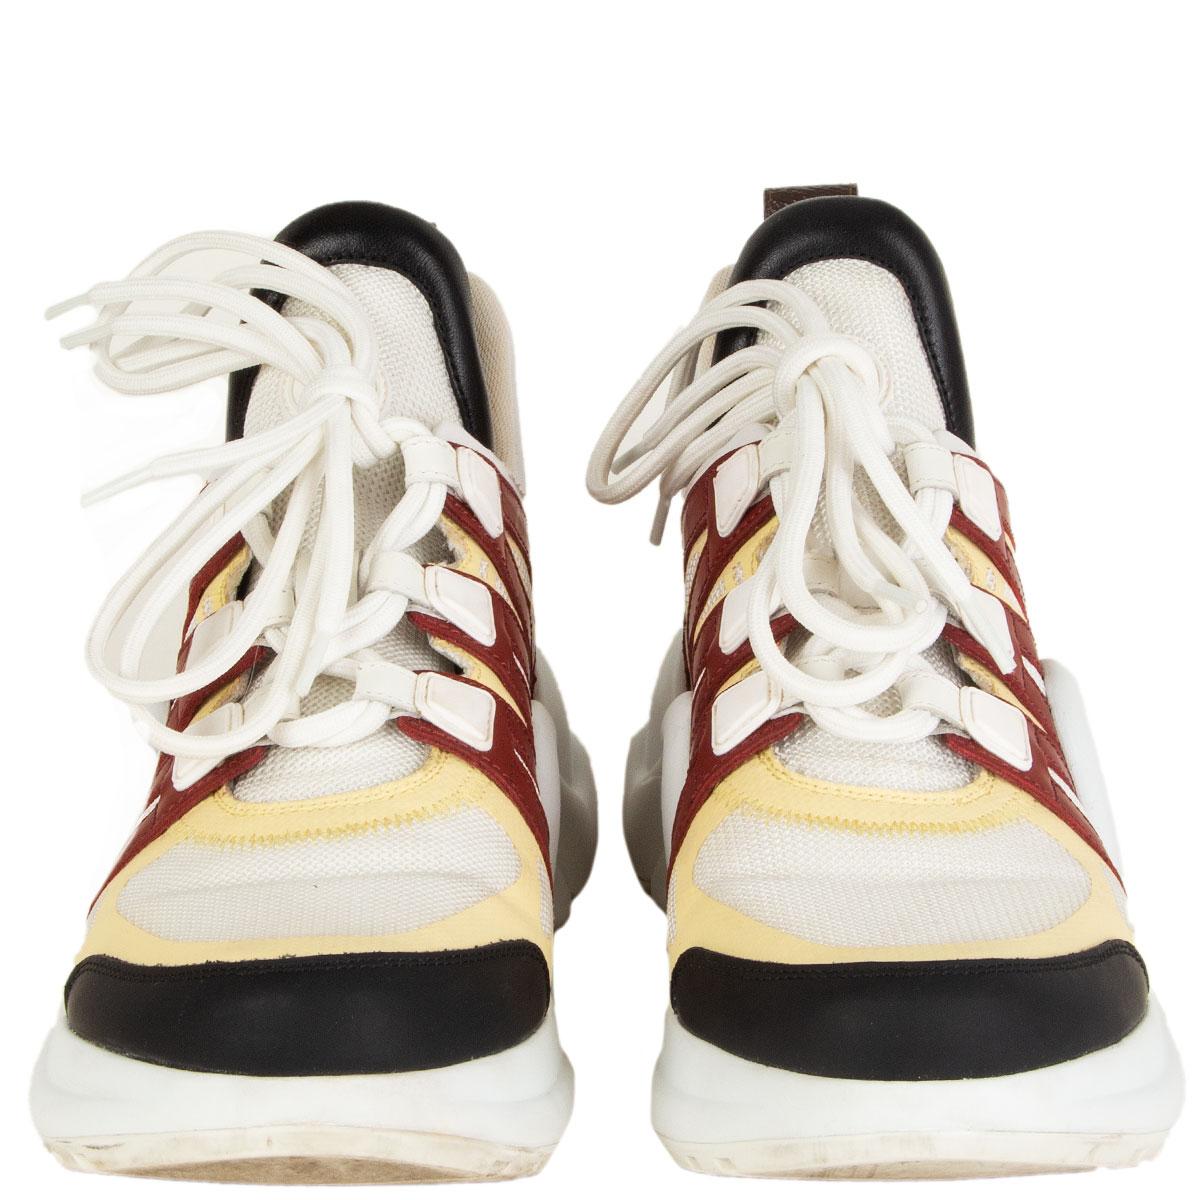 100% authentic  Louis Vuitton Archlight senakers in white mesh and technical fabric with black, pertol and white leather trimming. This sneaker is characterized by its oversized tongue and turbo outsole, which discreetly adds extra height. Monogram